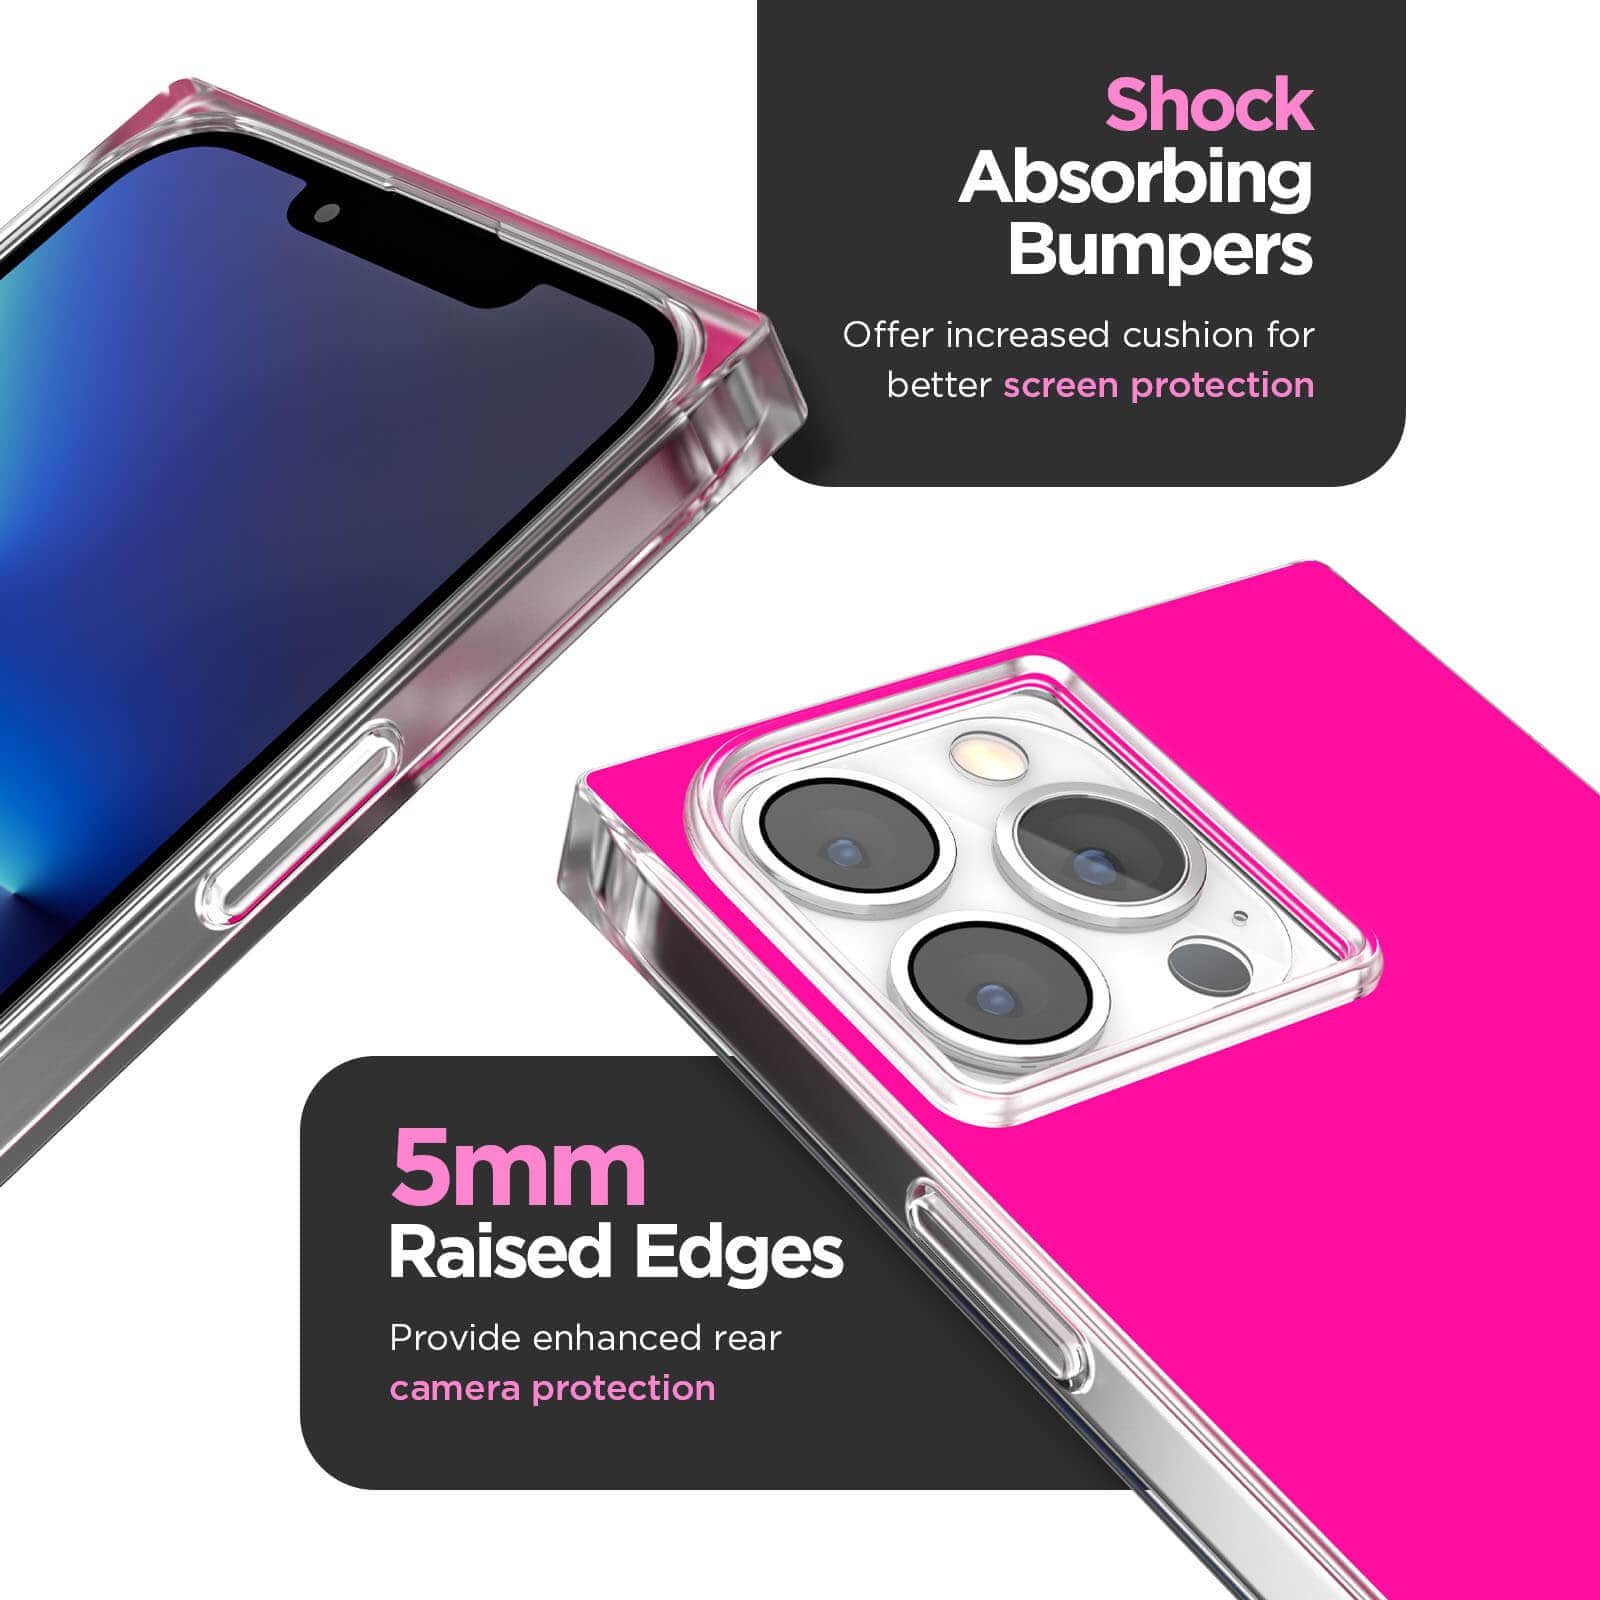 Shock absorbing bumpers offer increased cushion for better screen protection. 5mm raised edges provide enhanced rear camera protection. color::Hot Pink